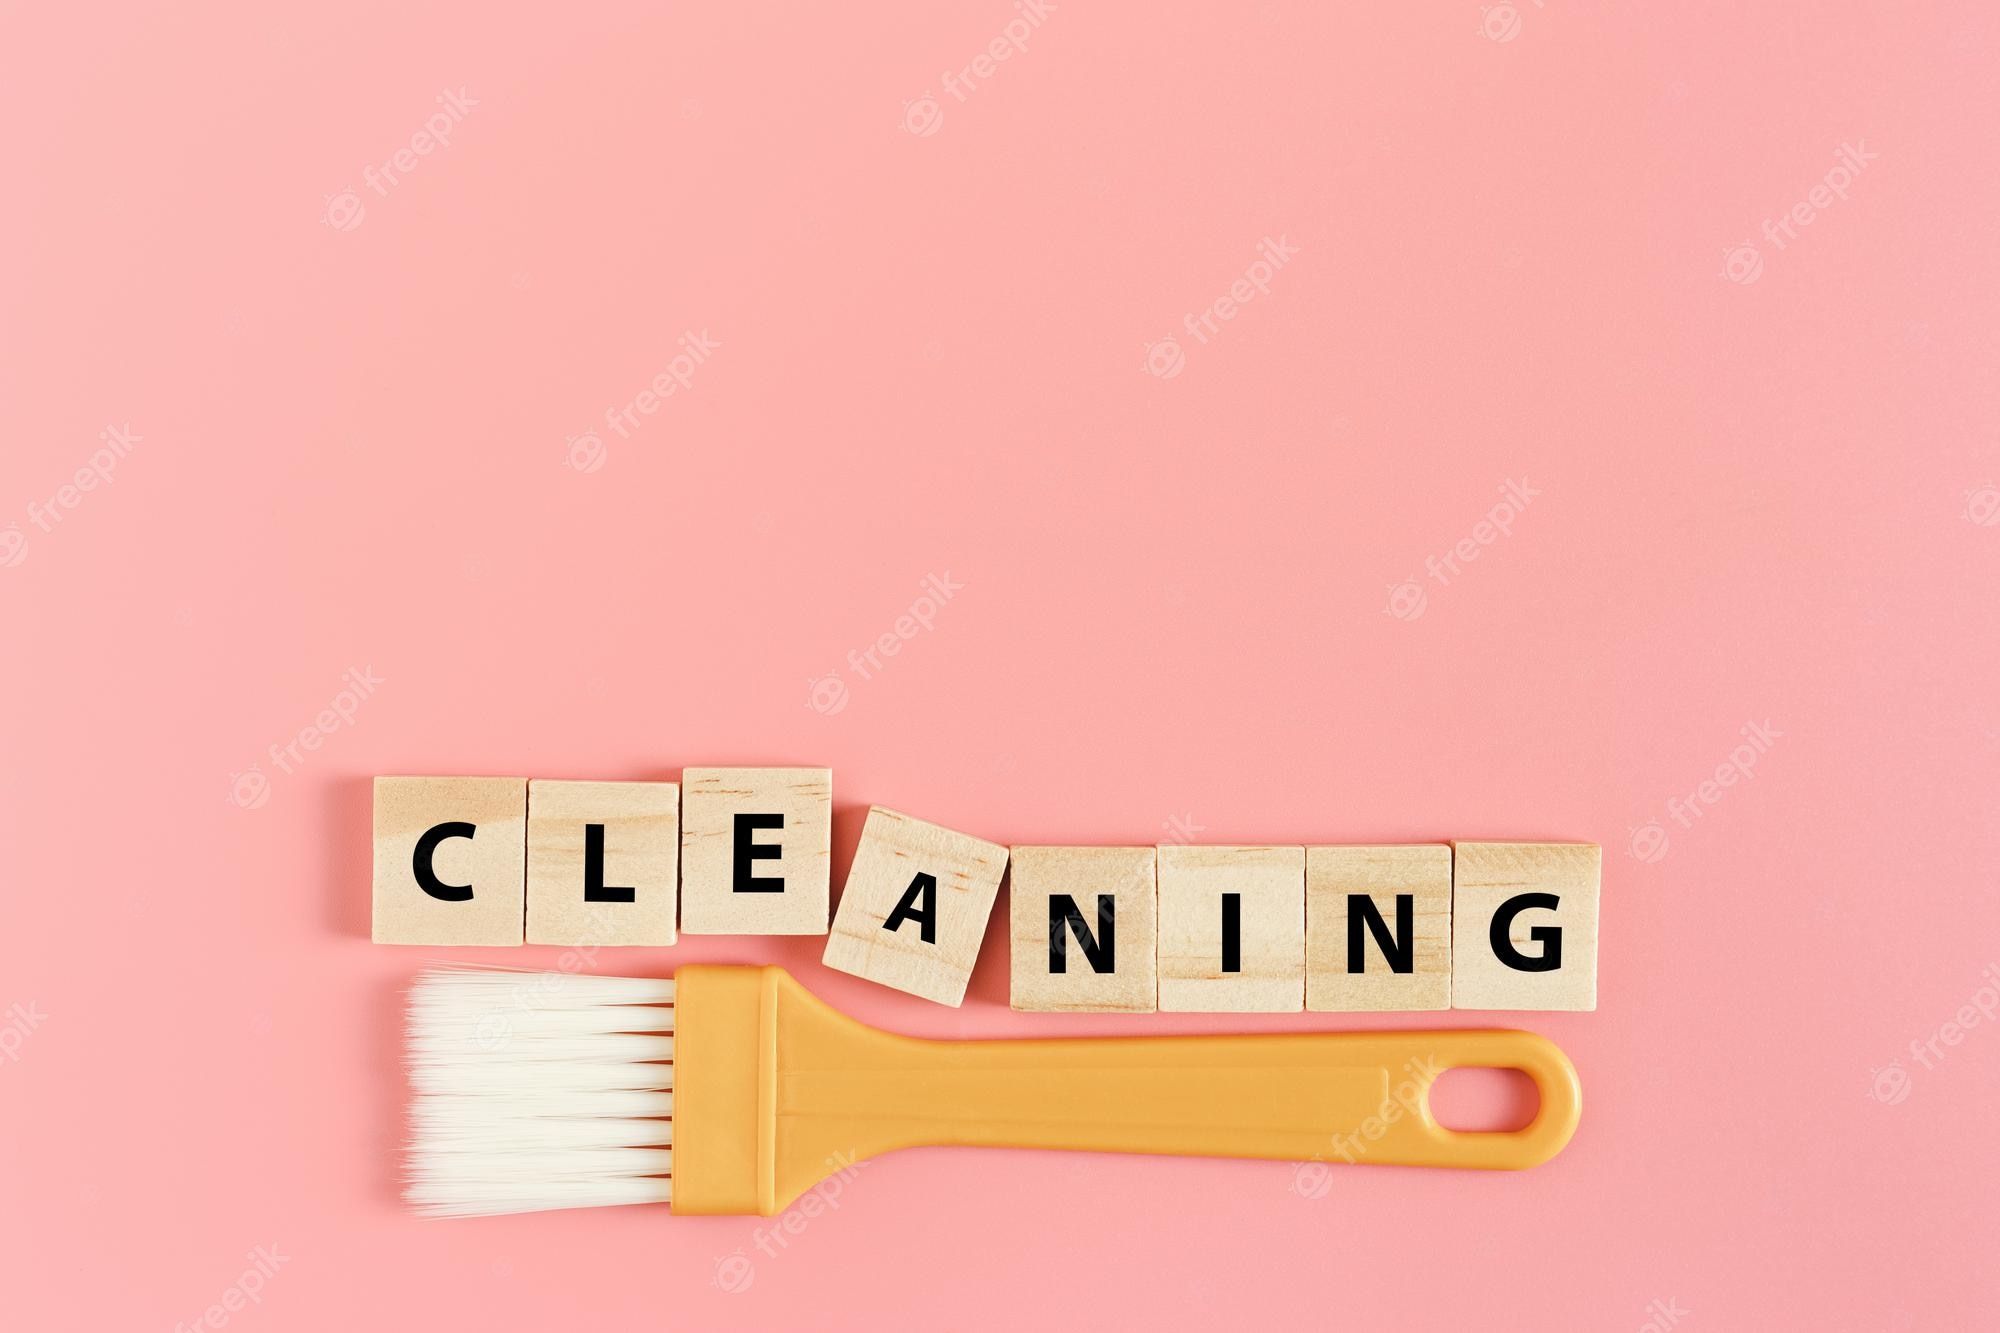 Cleaning with wooden blocks and a brush on pink background - Clean